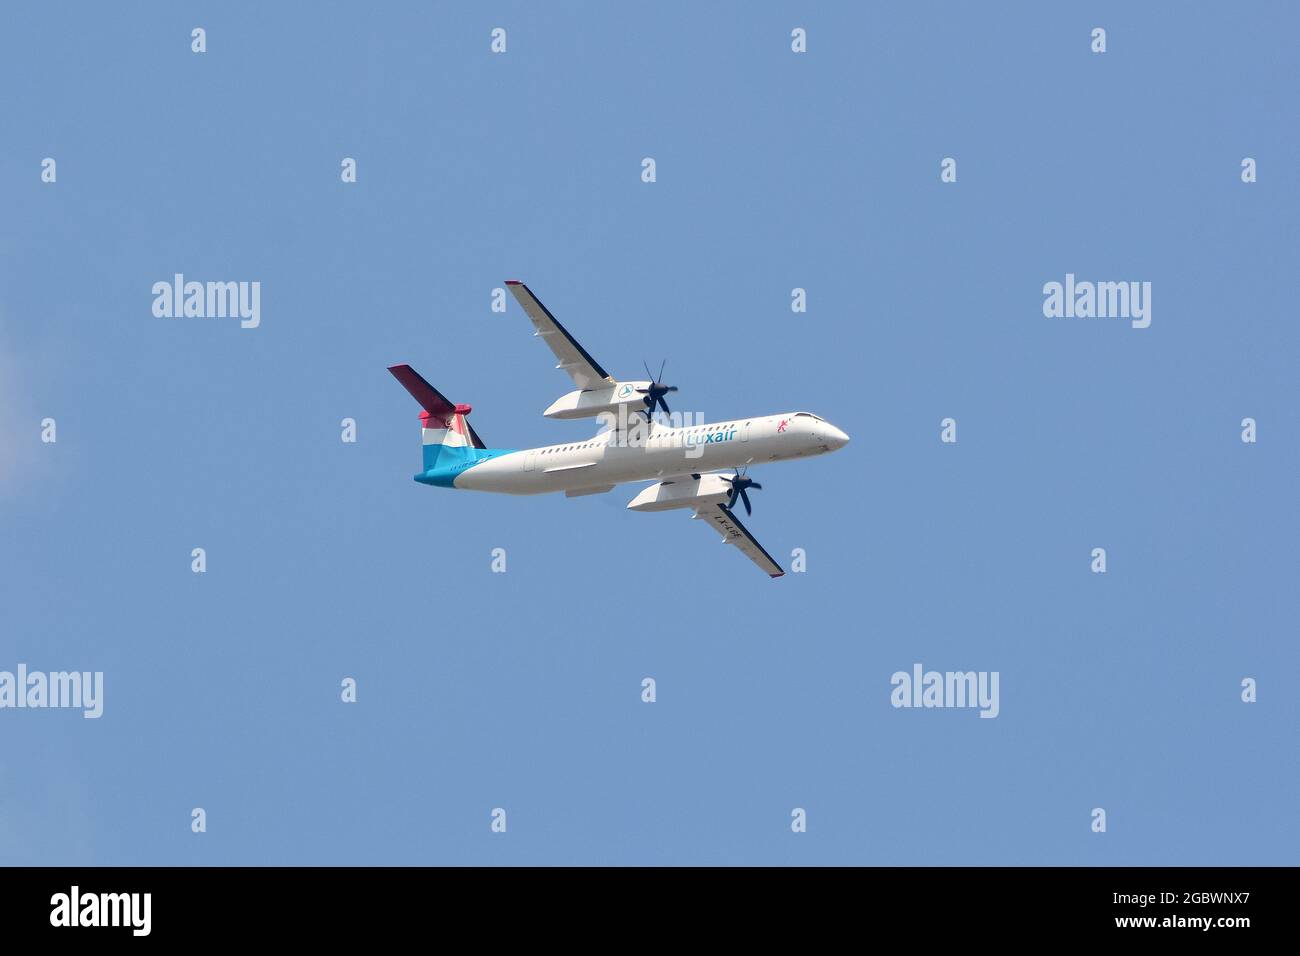 Luxair (is the flag carrier airline of Luxembourg), De Havilland Canada Dash 8-400 airplane (turboprop-powered) Stock Photo